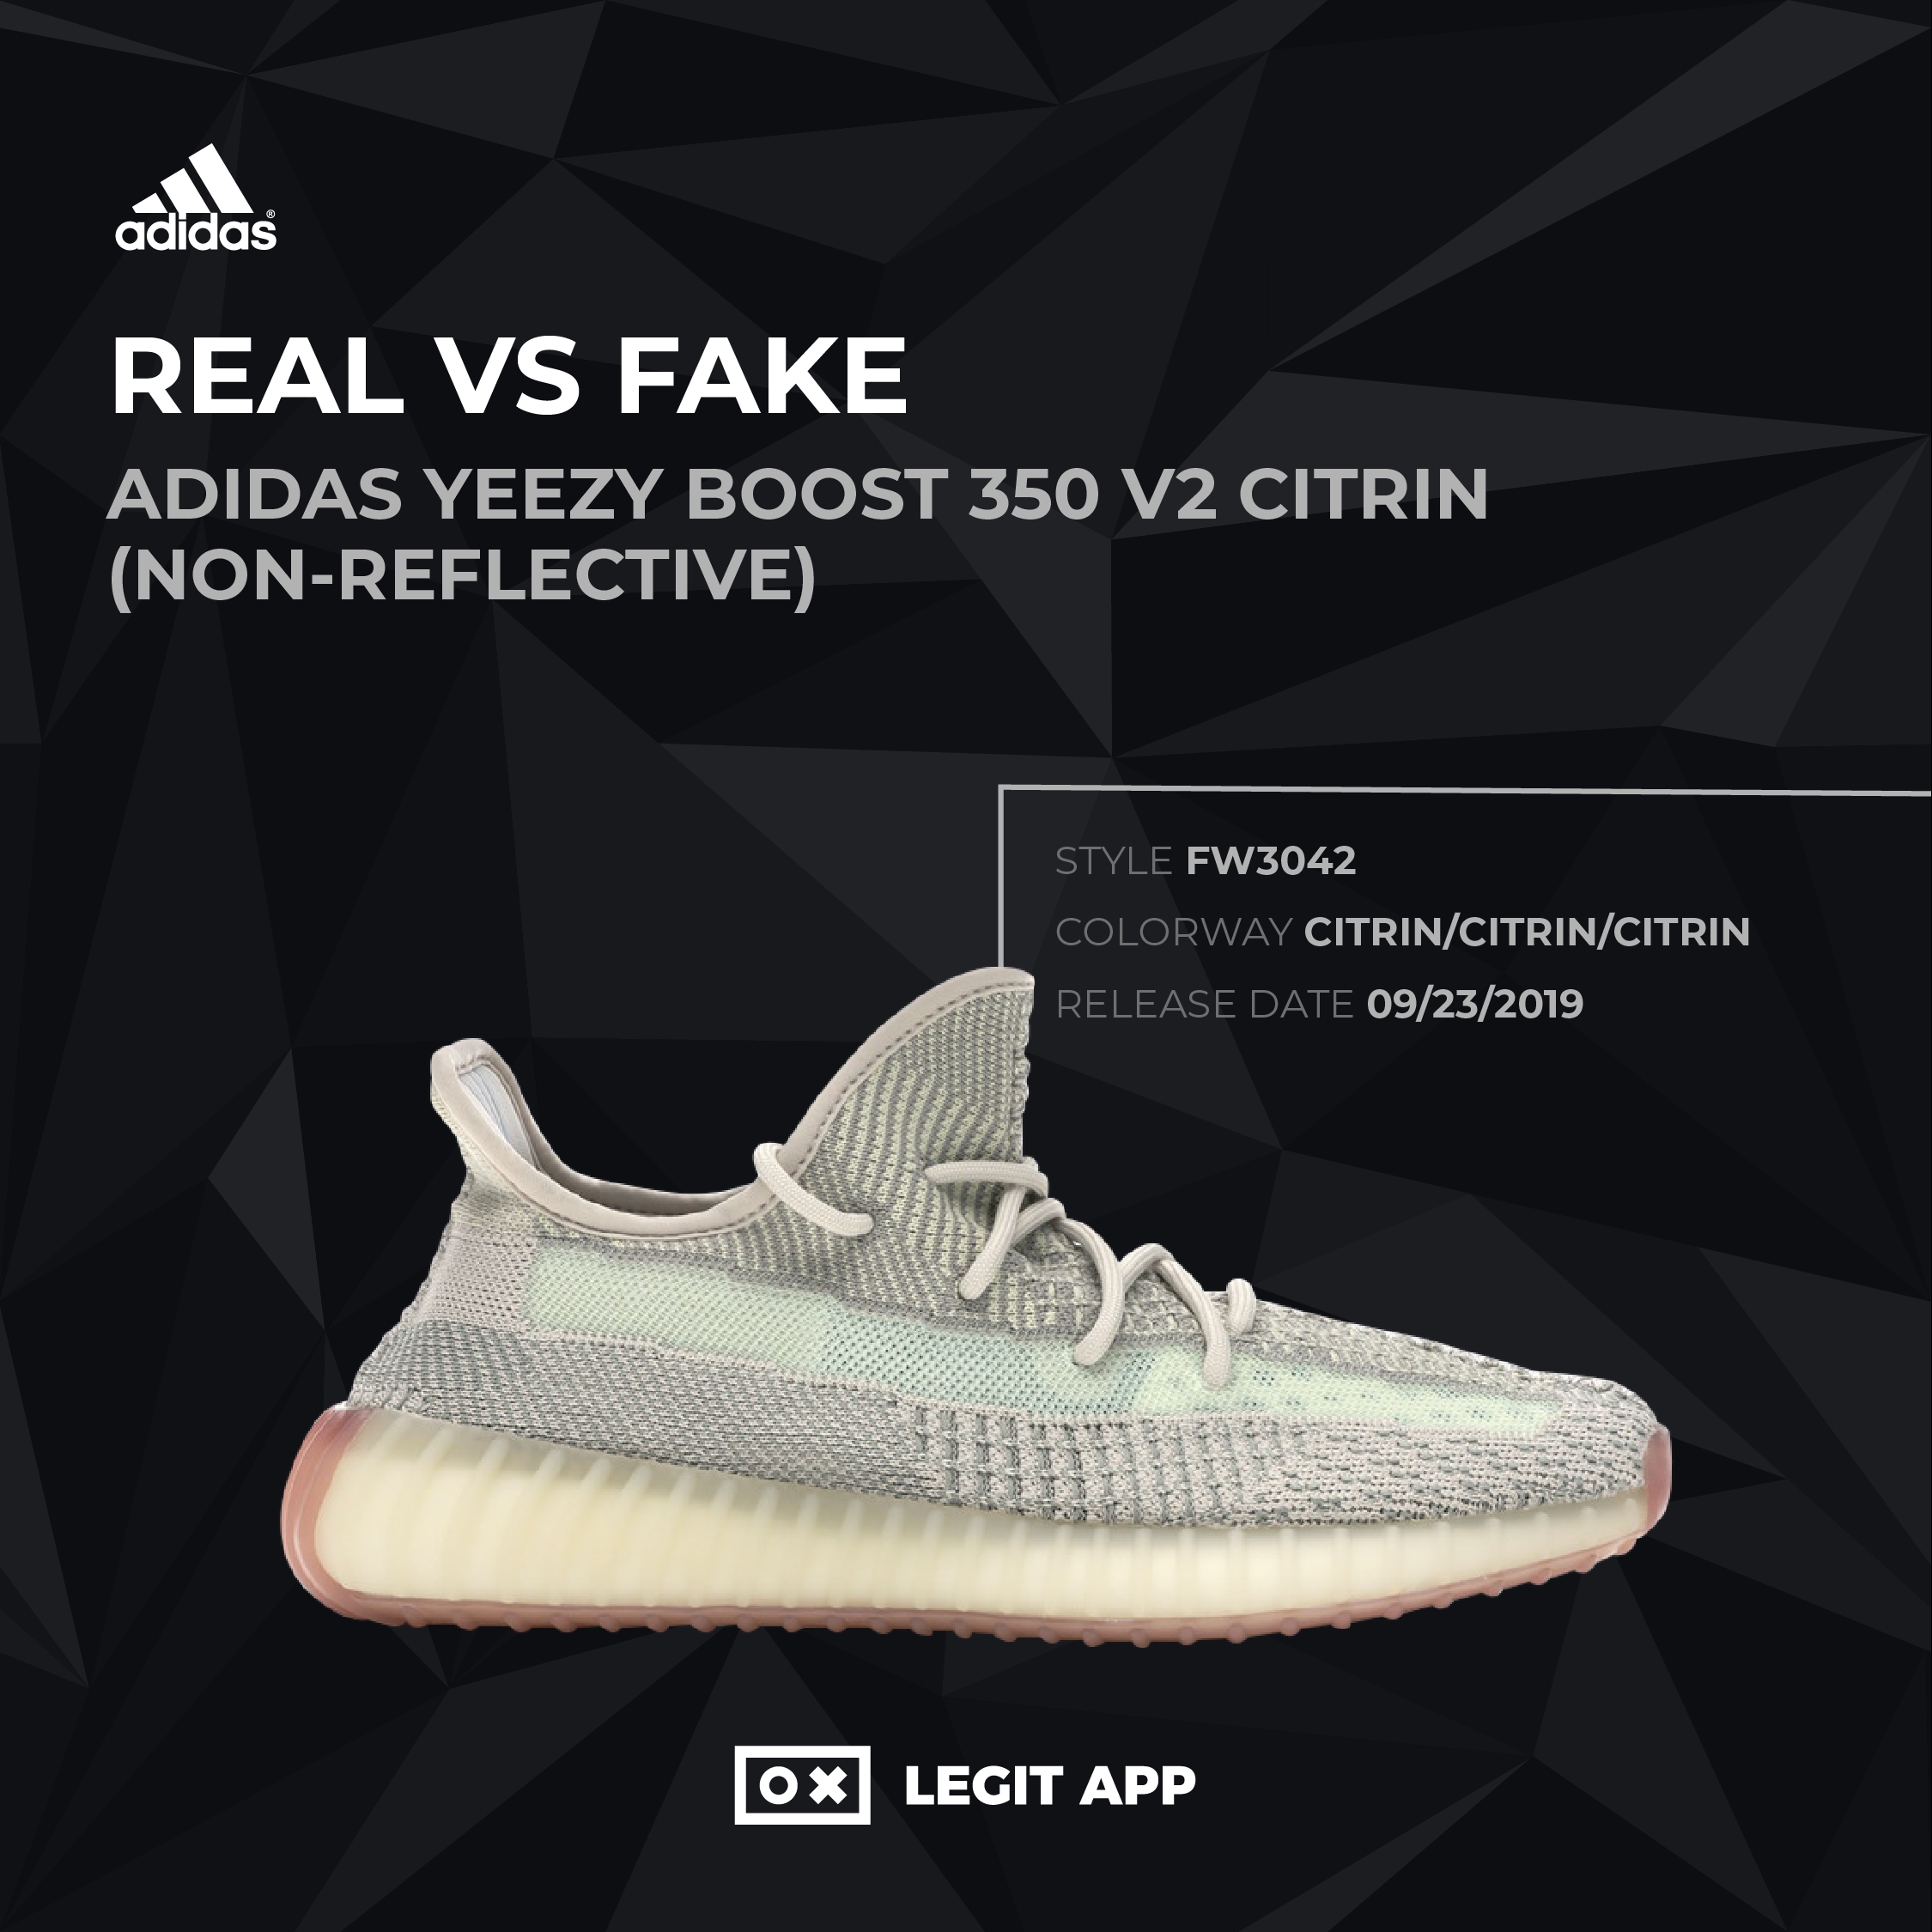 non reflective yeezy meaning